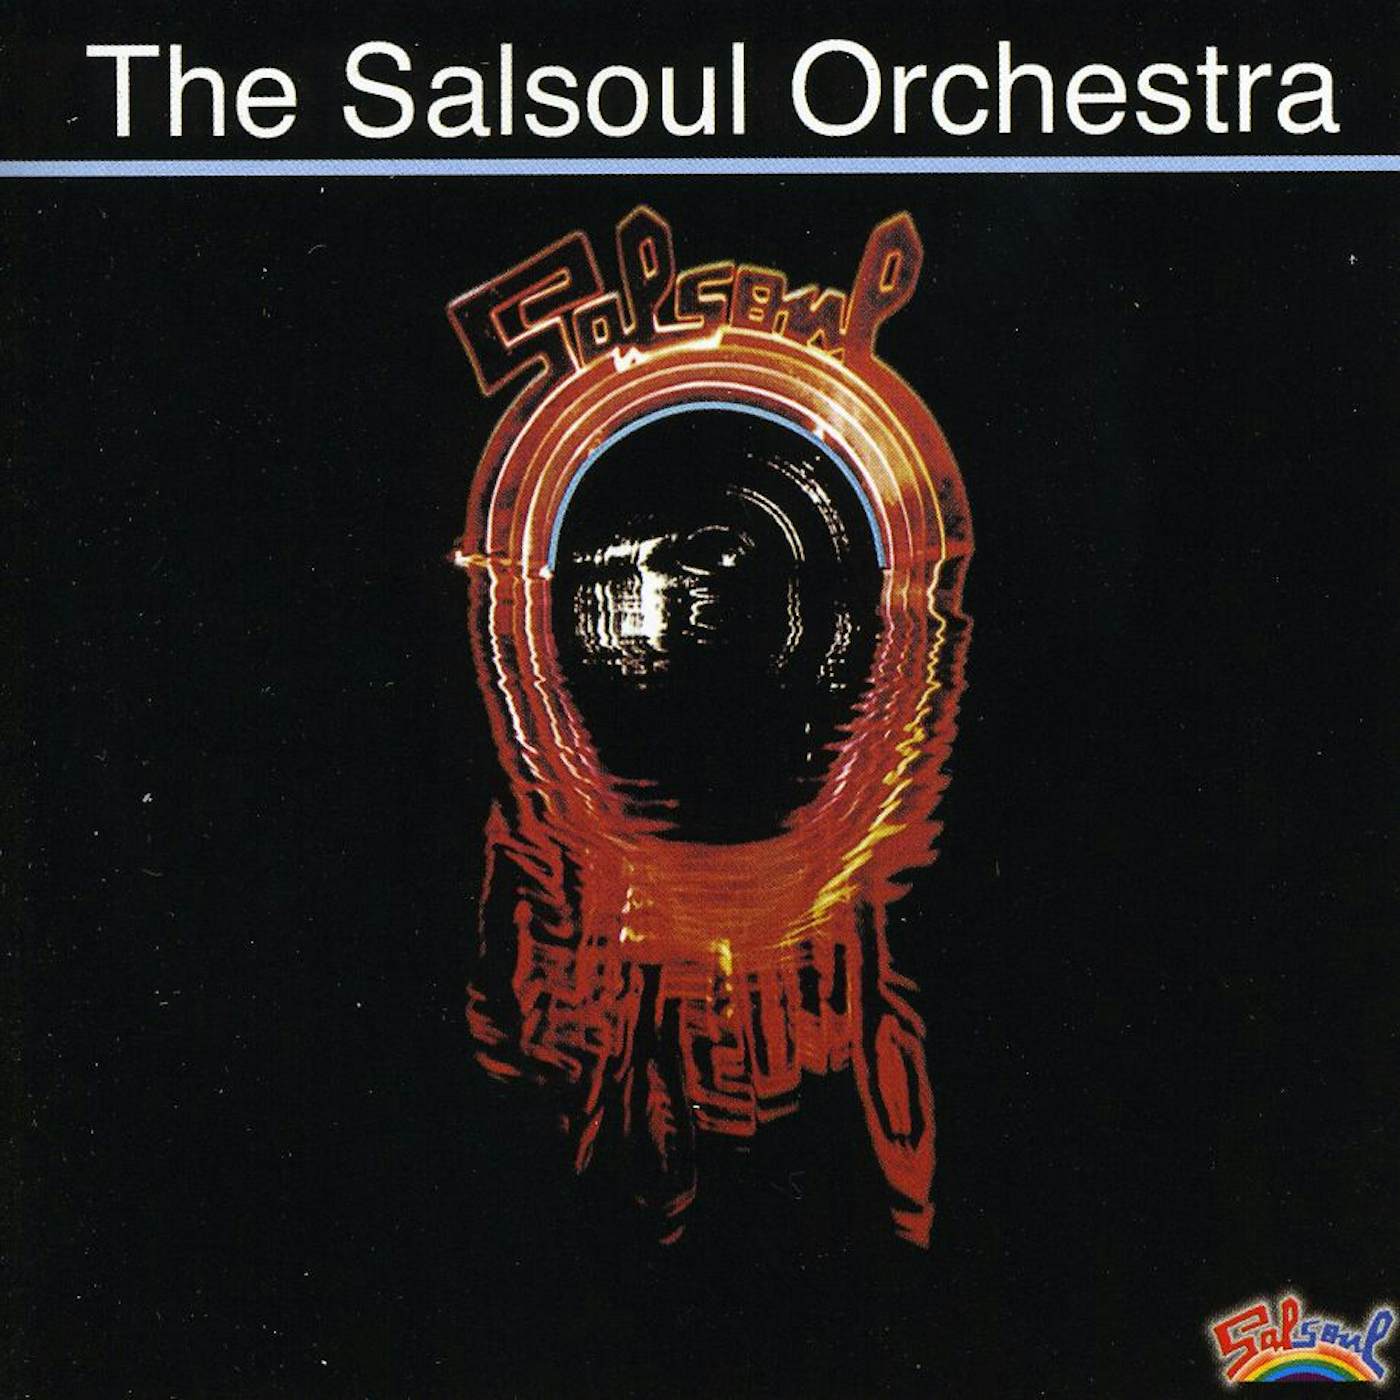 The Salsoul Orchestra SALSOUL CD